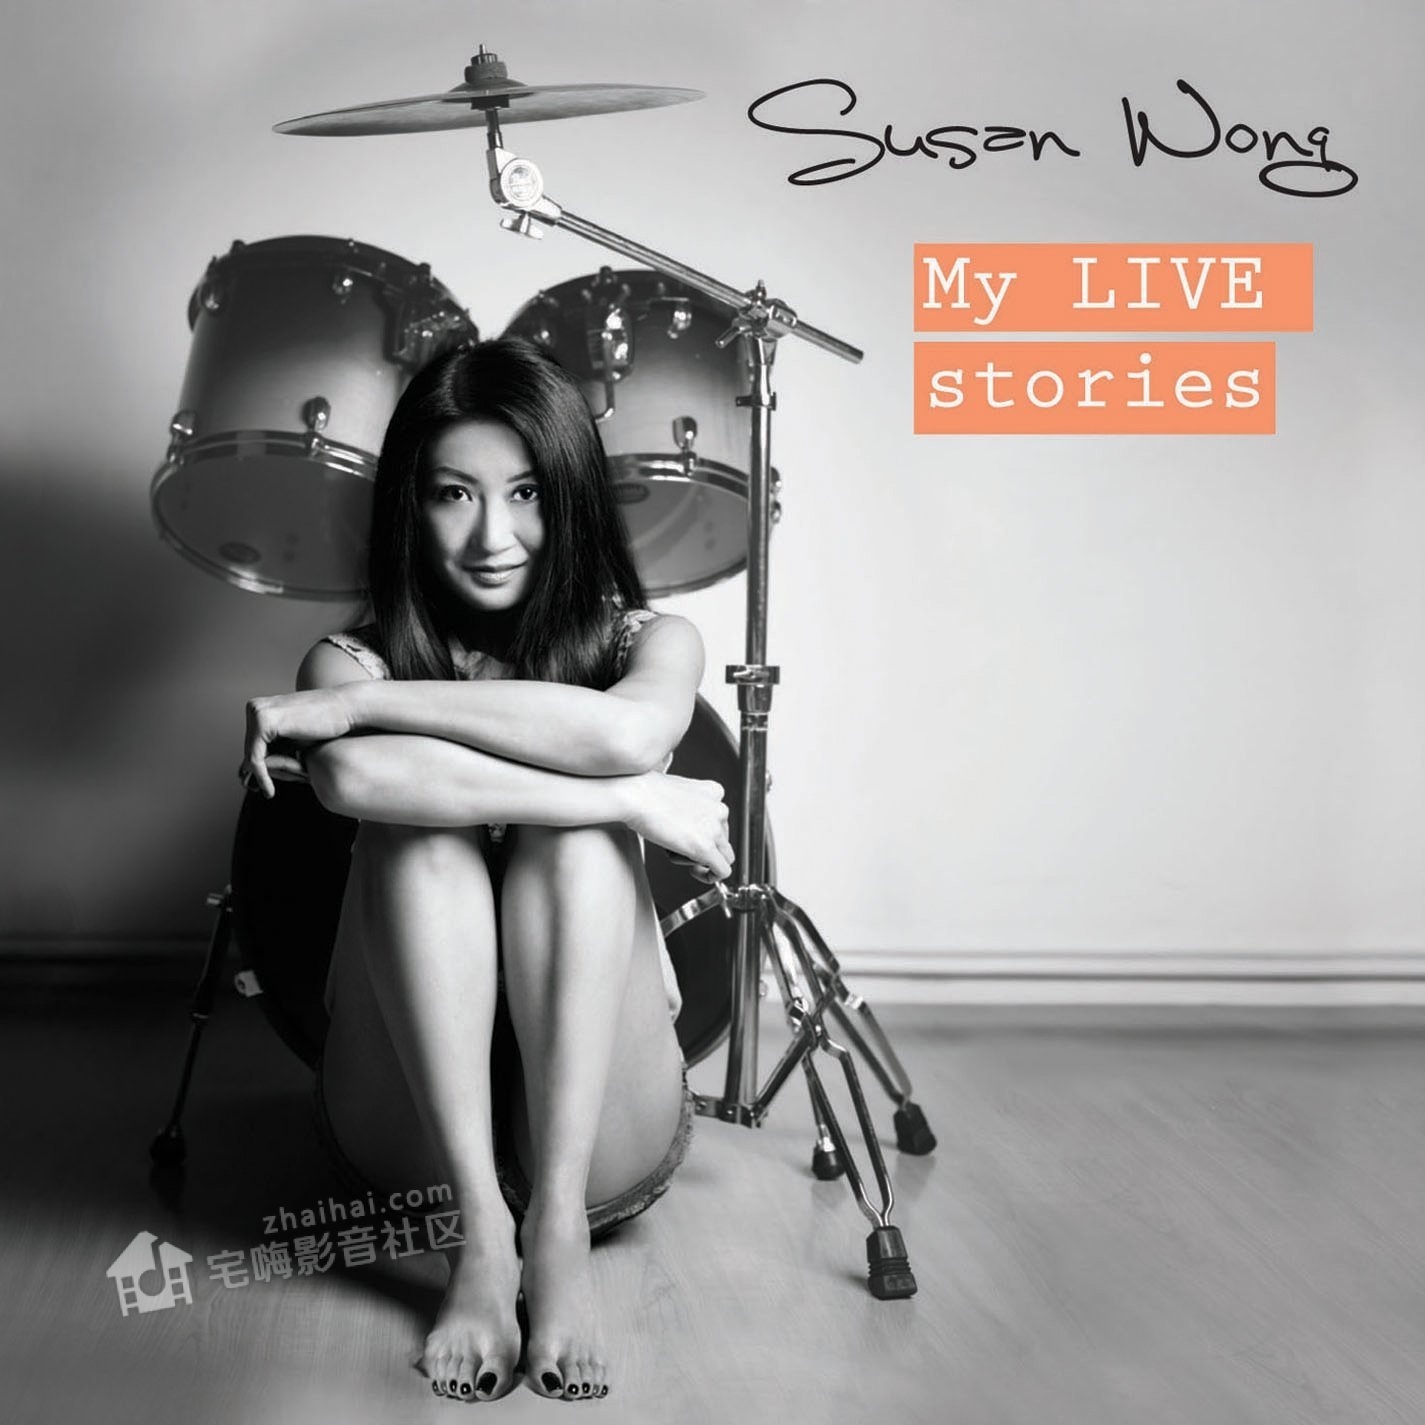 SUSAN WONG - My Live Stories 2012 [SACD] ISO-front.jpg